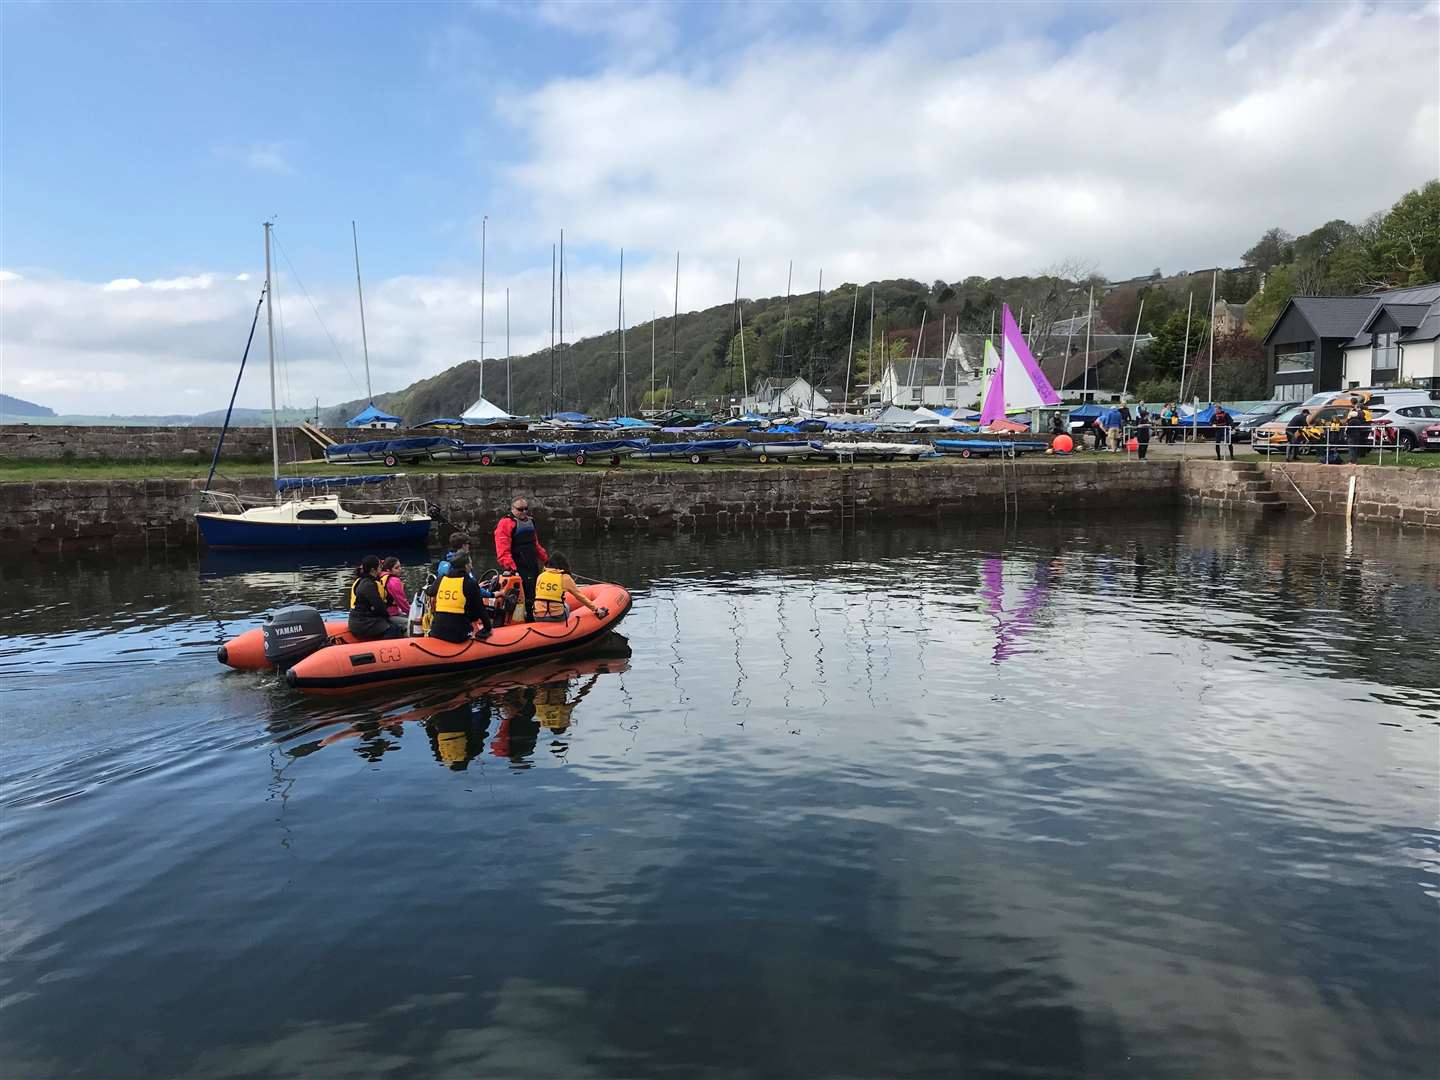 The fun day which was held at Chanonry Sailing Club.